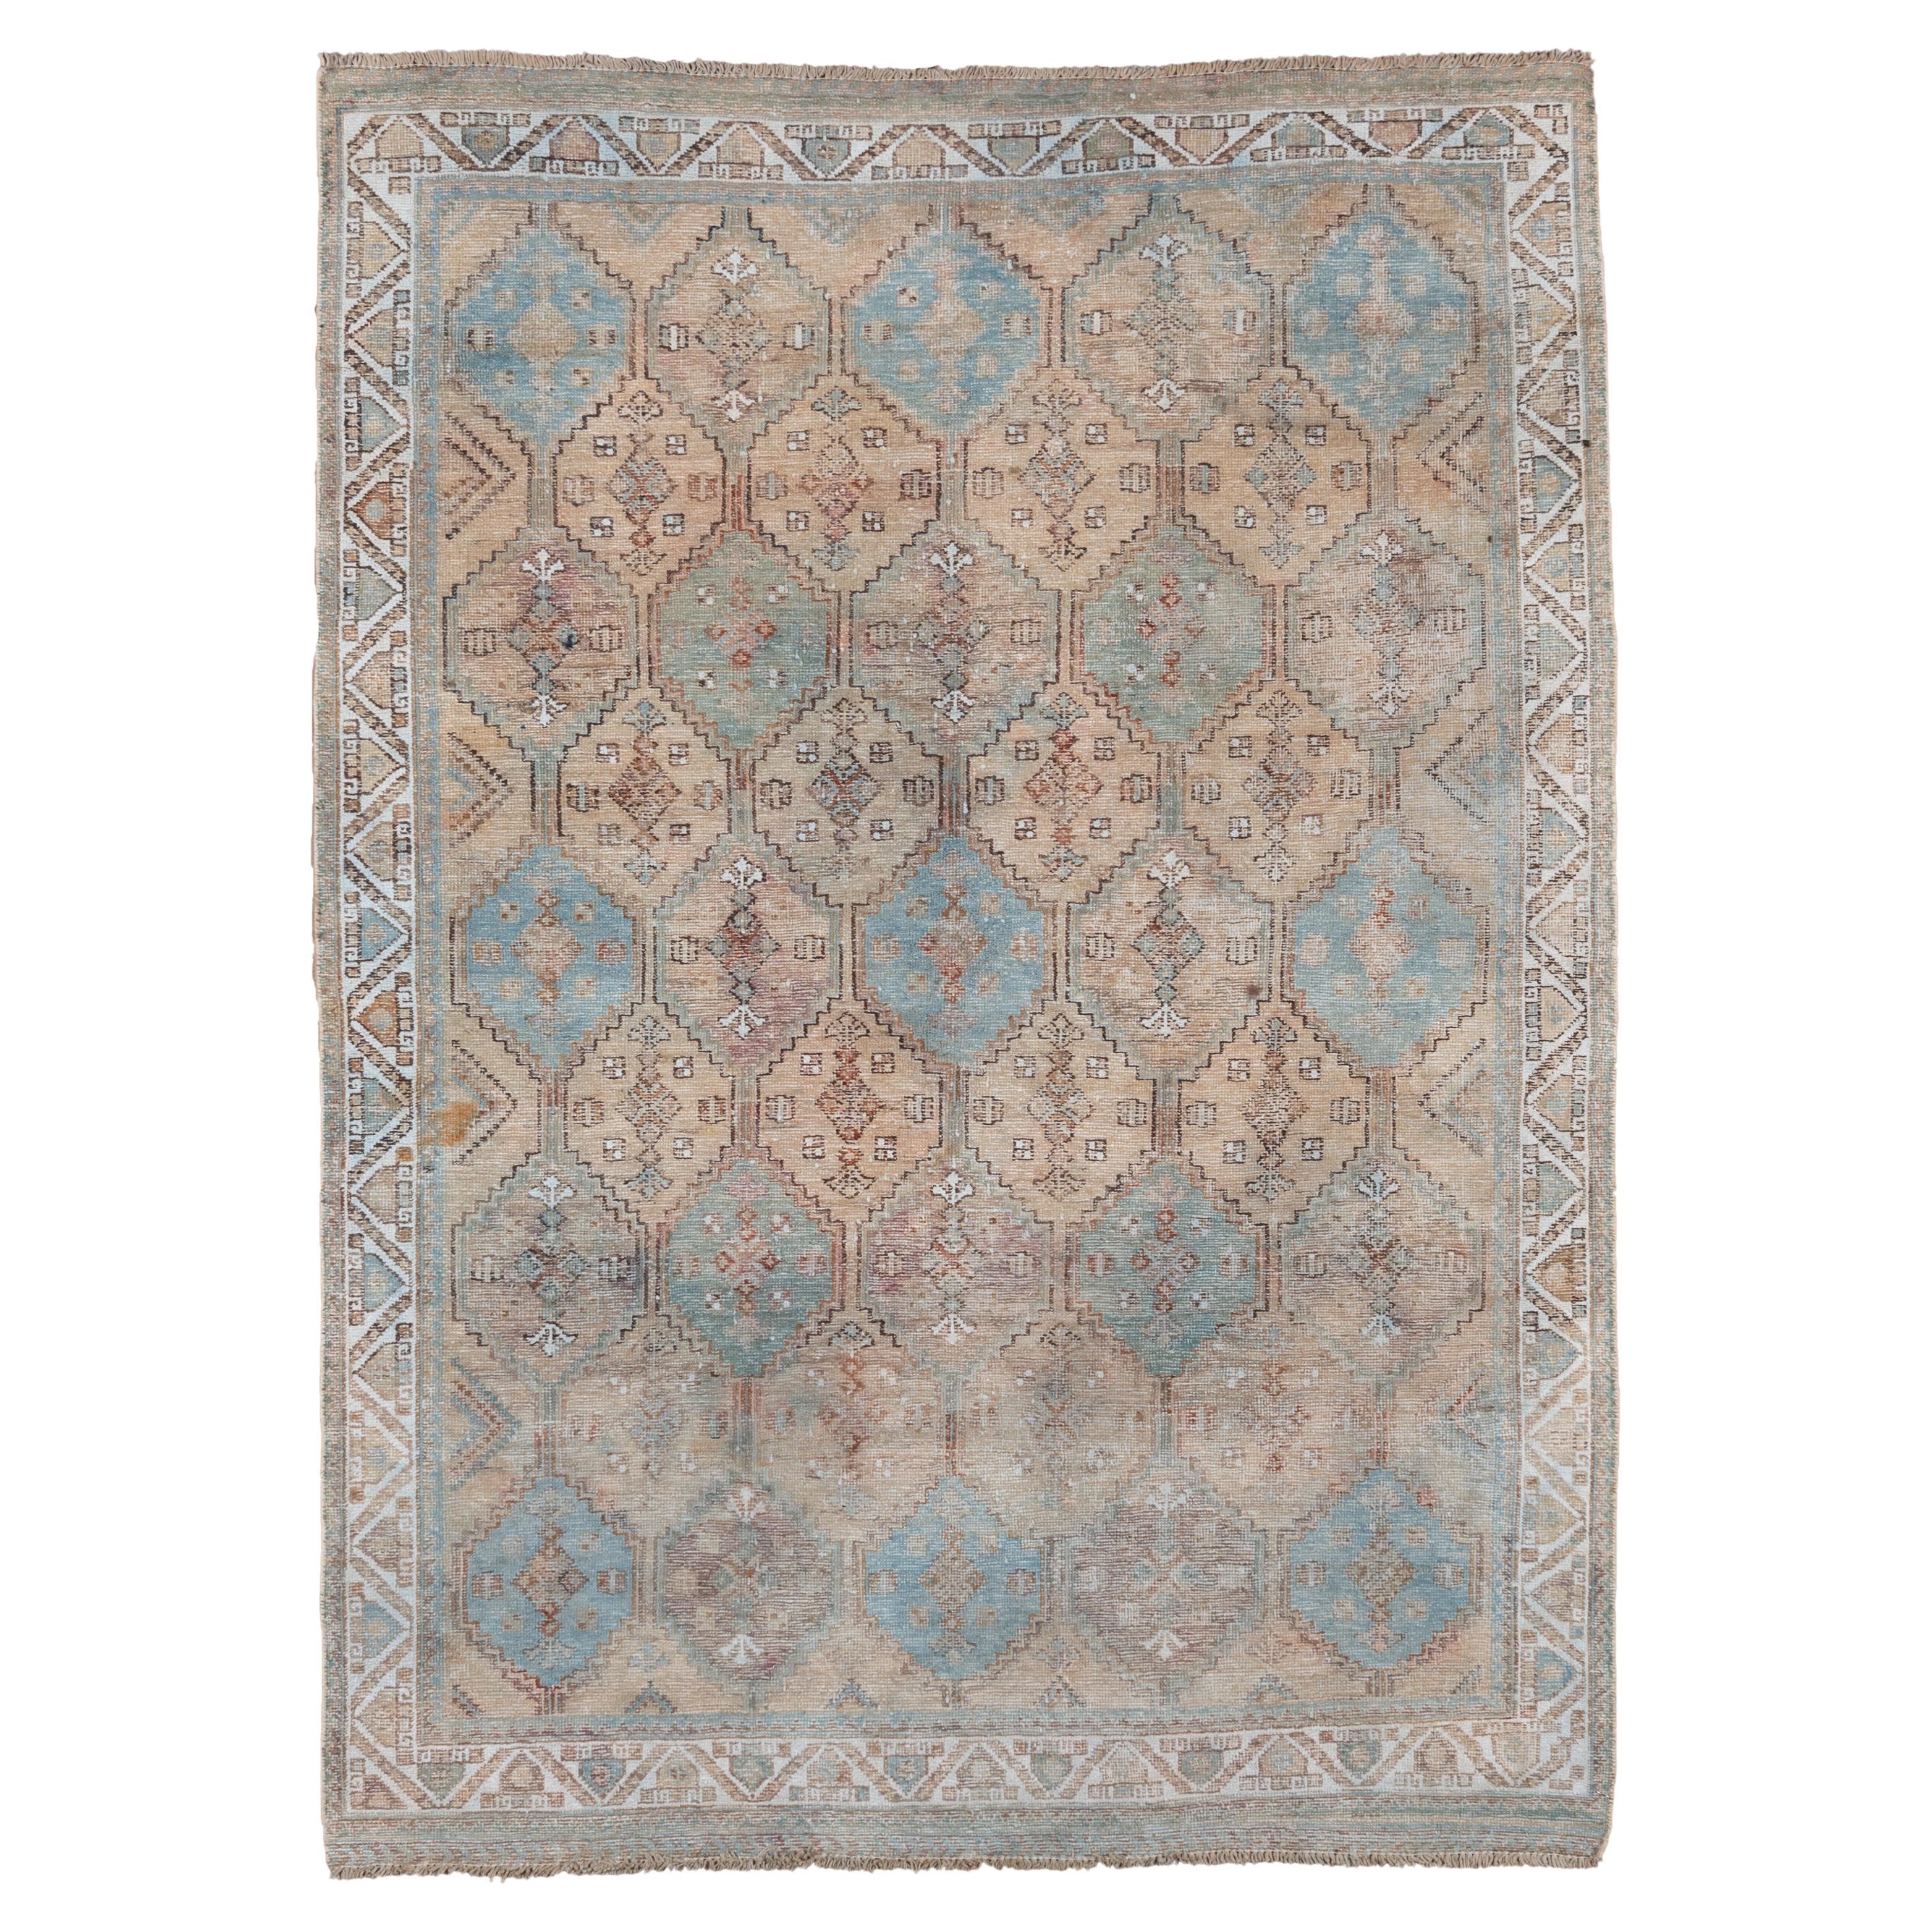 Soft Palette & Beautiful Persian Afghar Rug. Light Blue Accents, circa 1930s